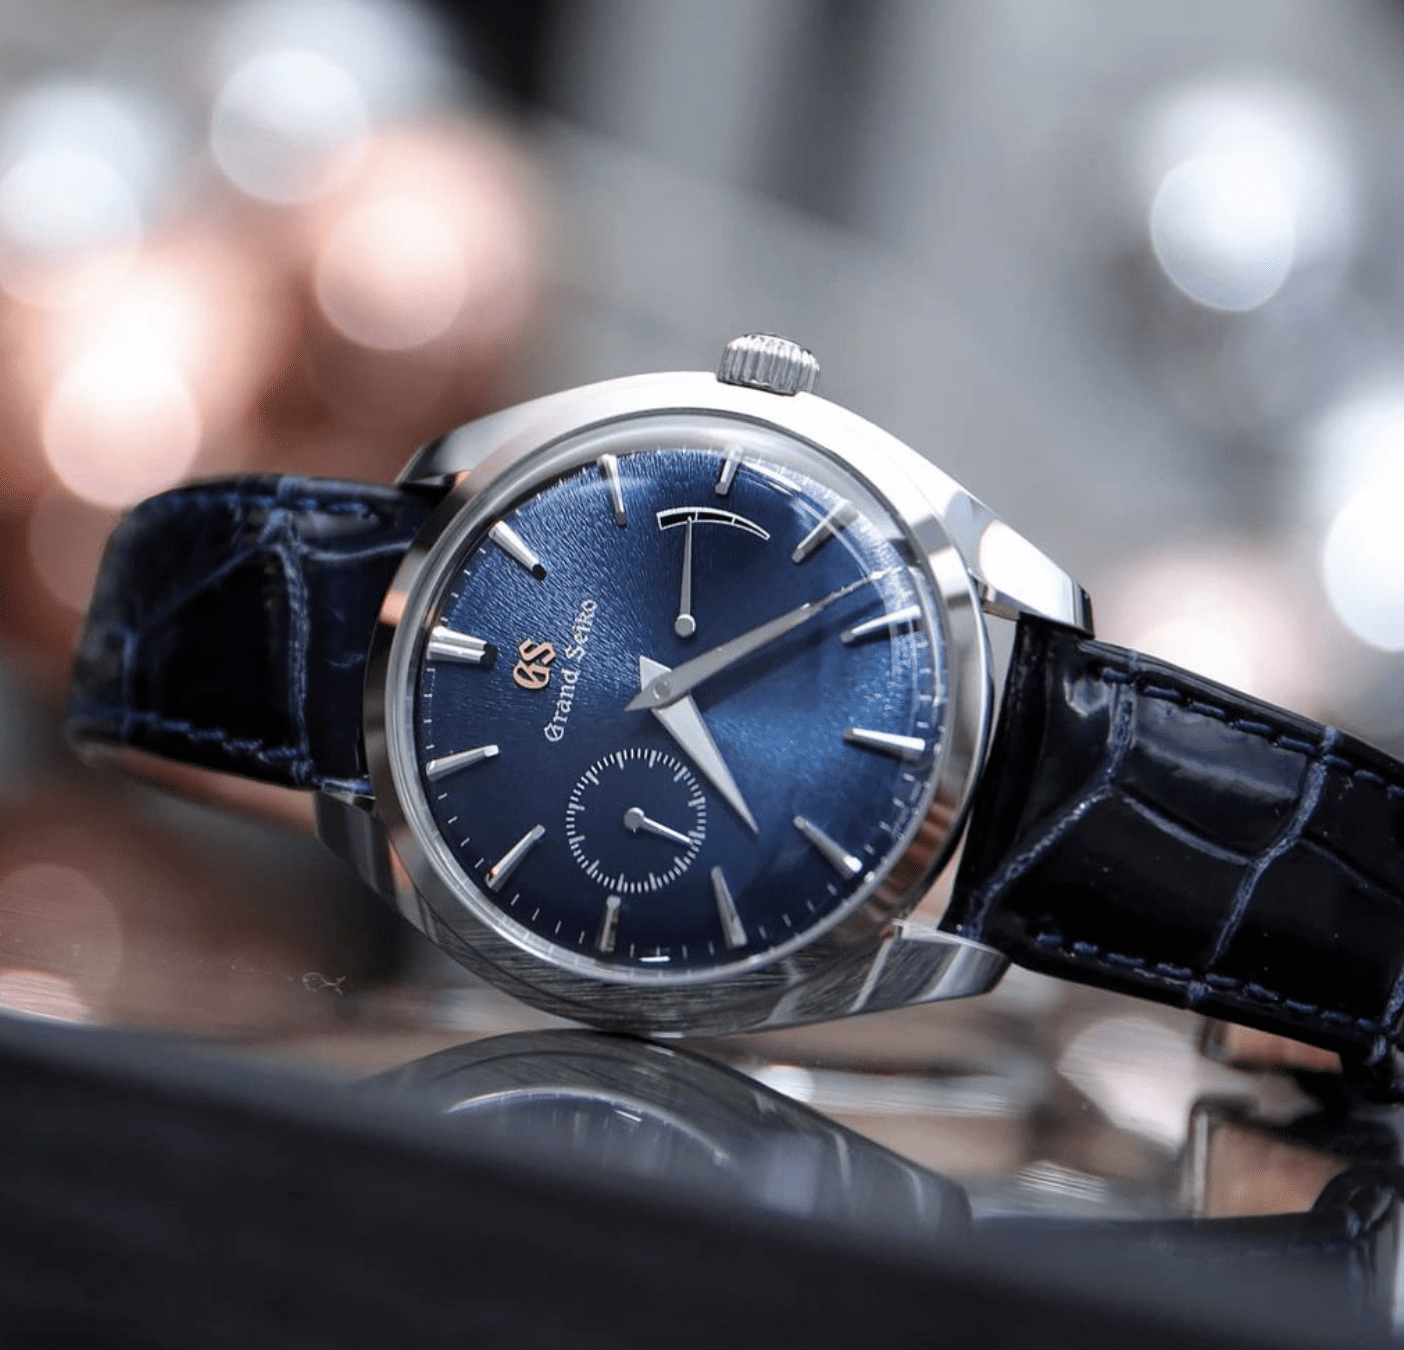 5 of the best Grand Seiko Instagram accounts that you need in your feed